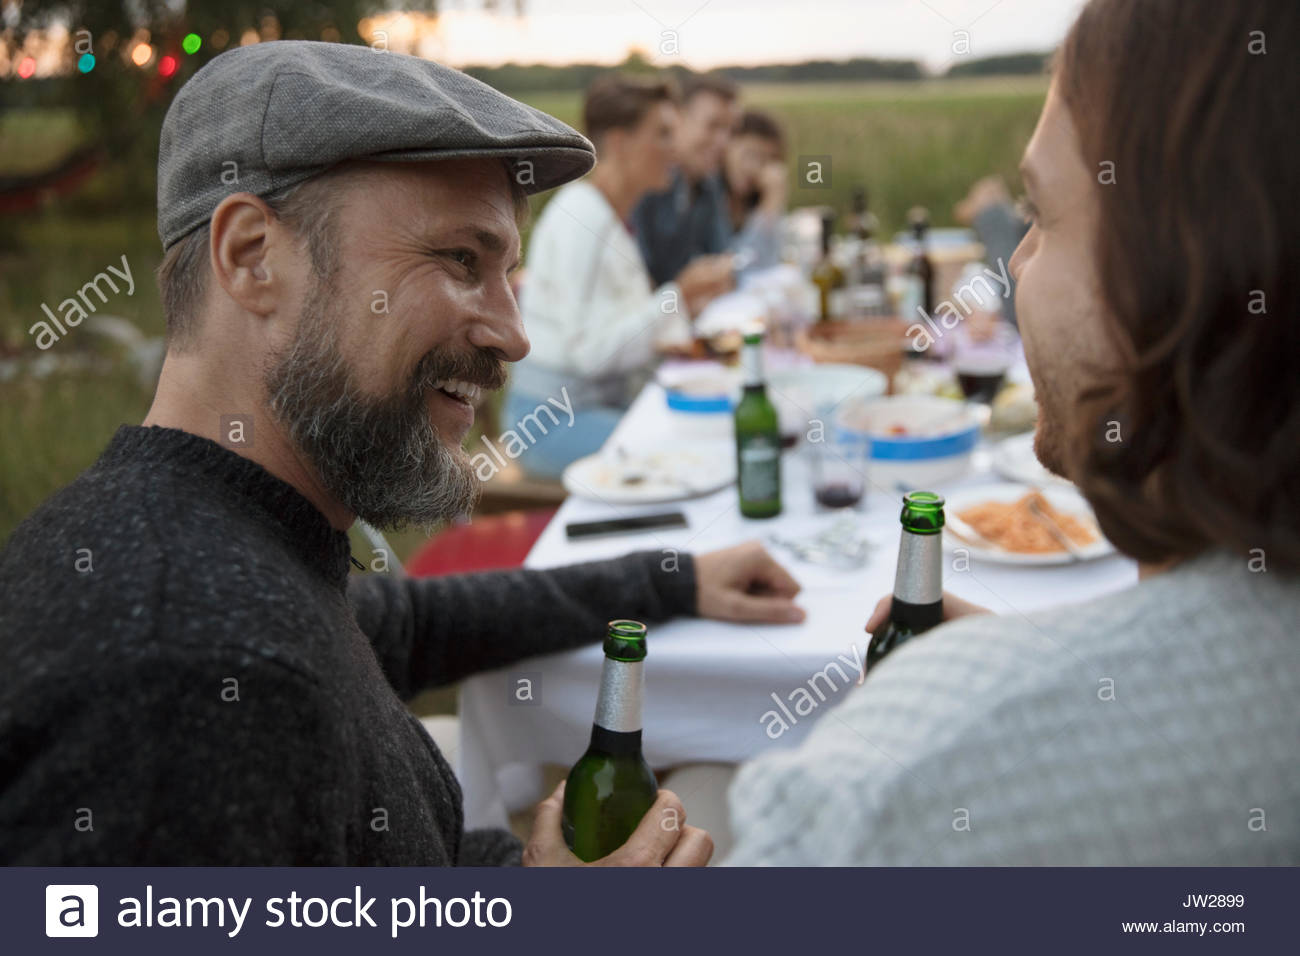 Smiling man drinking beer and talking to friend at summer garden party dinner Stock Photo